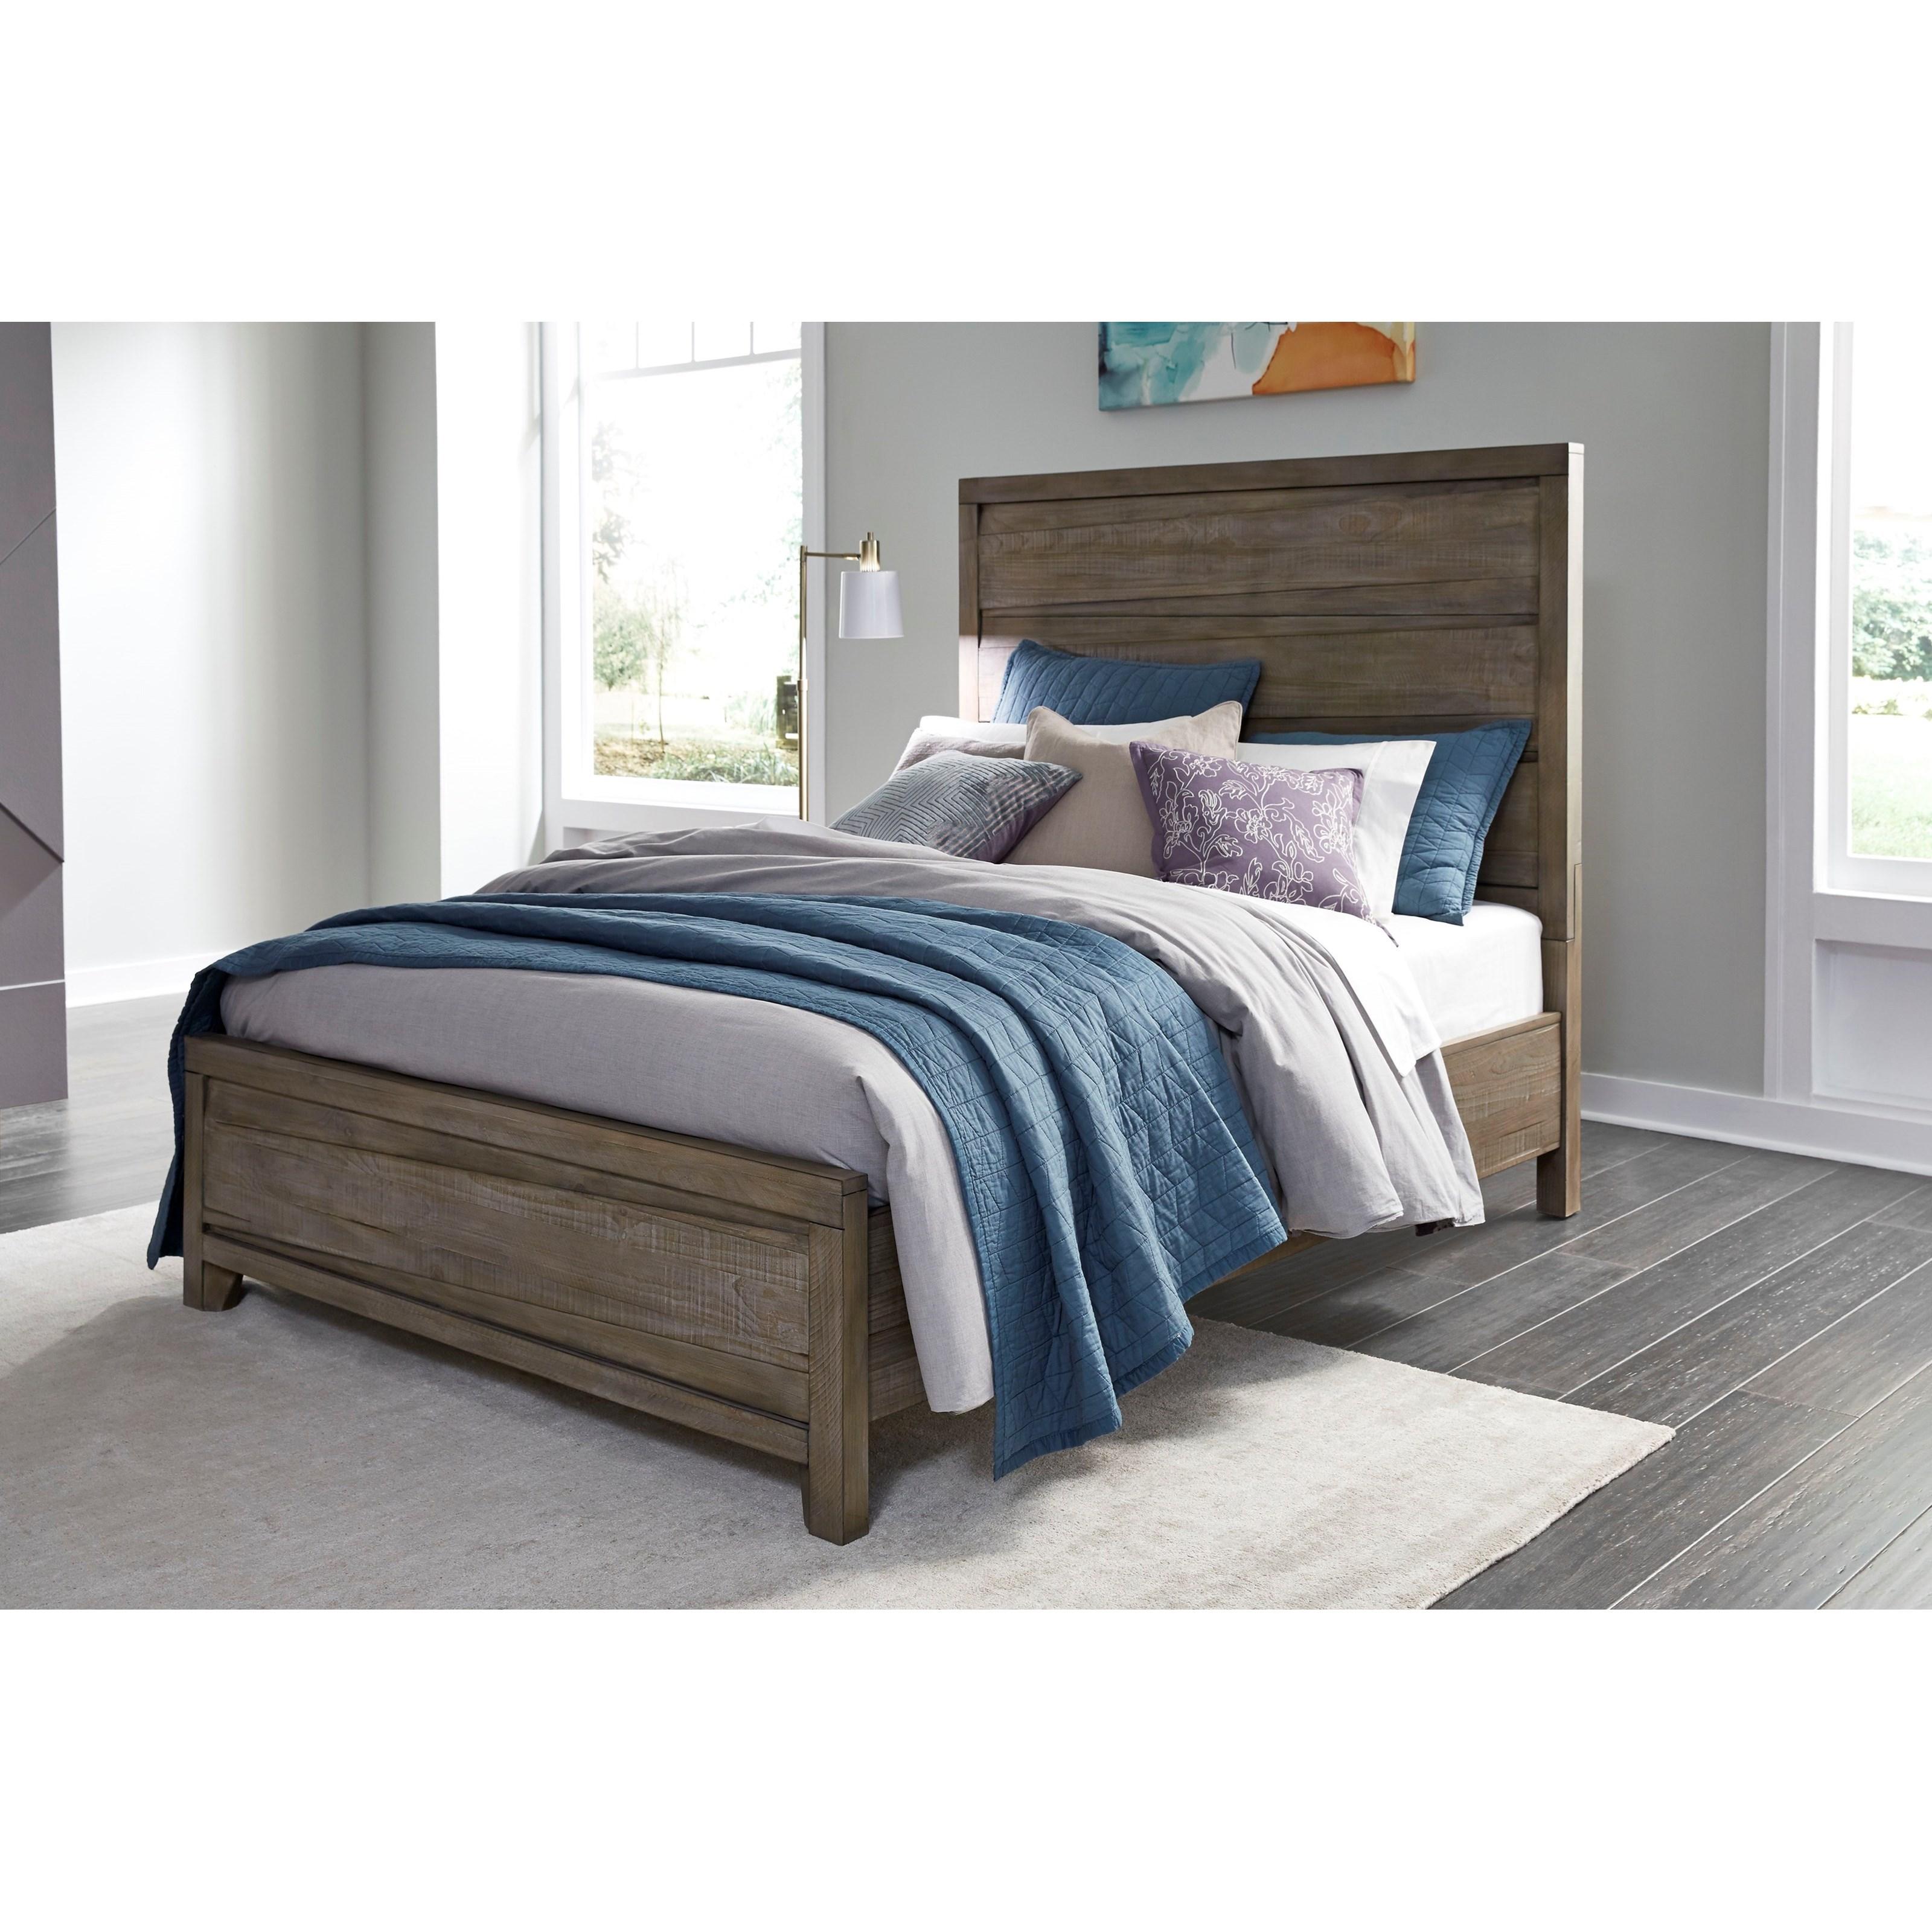 Casual, Rustic Panel Bed HEARST 6VF3A6 in Tan 